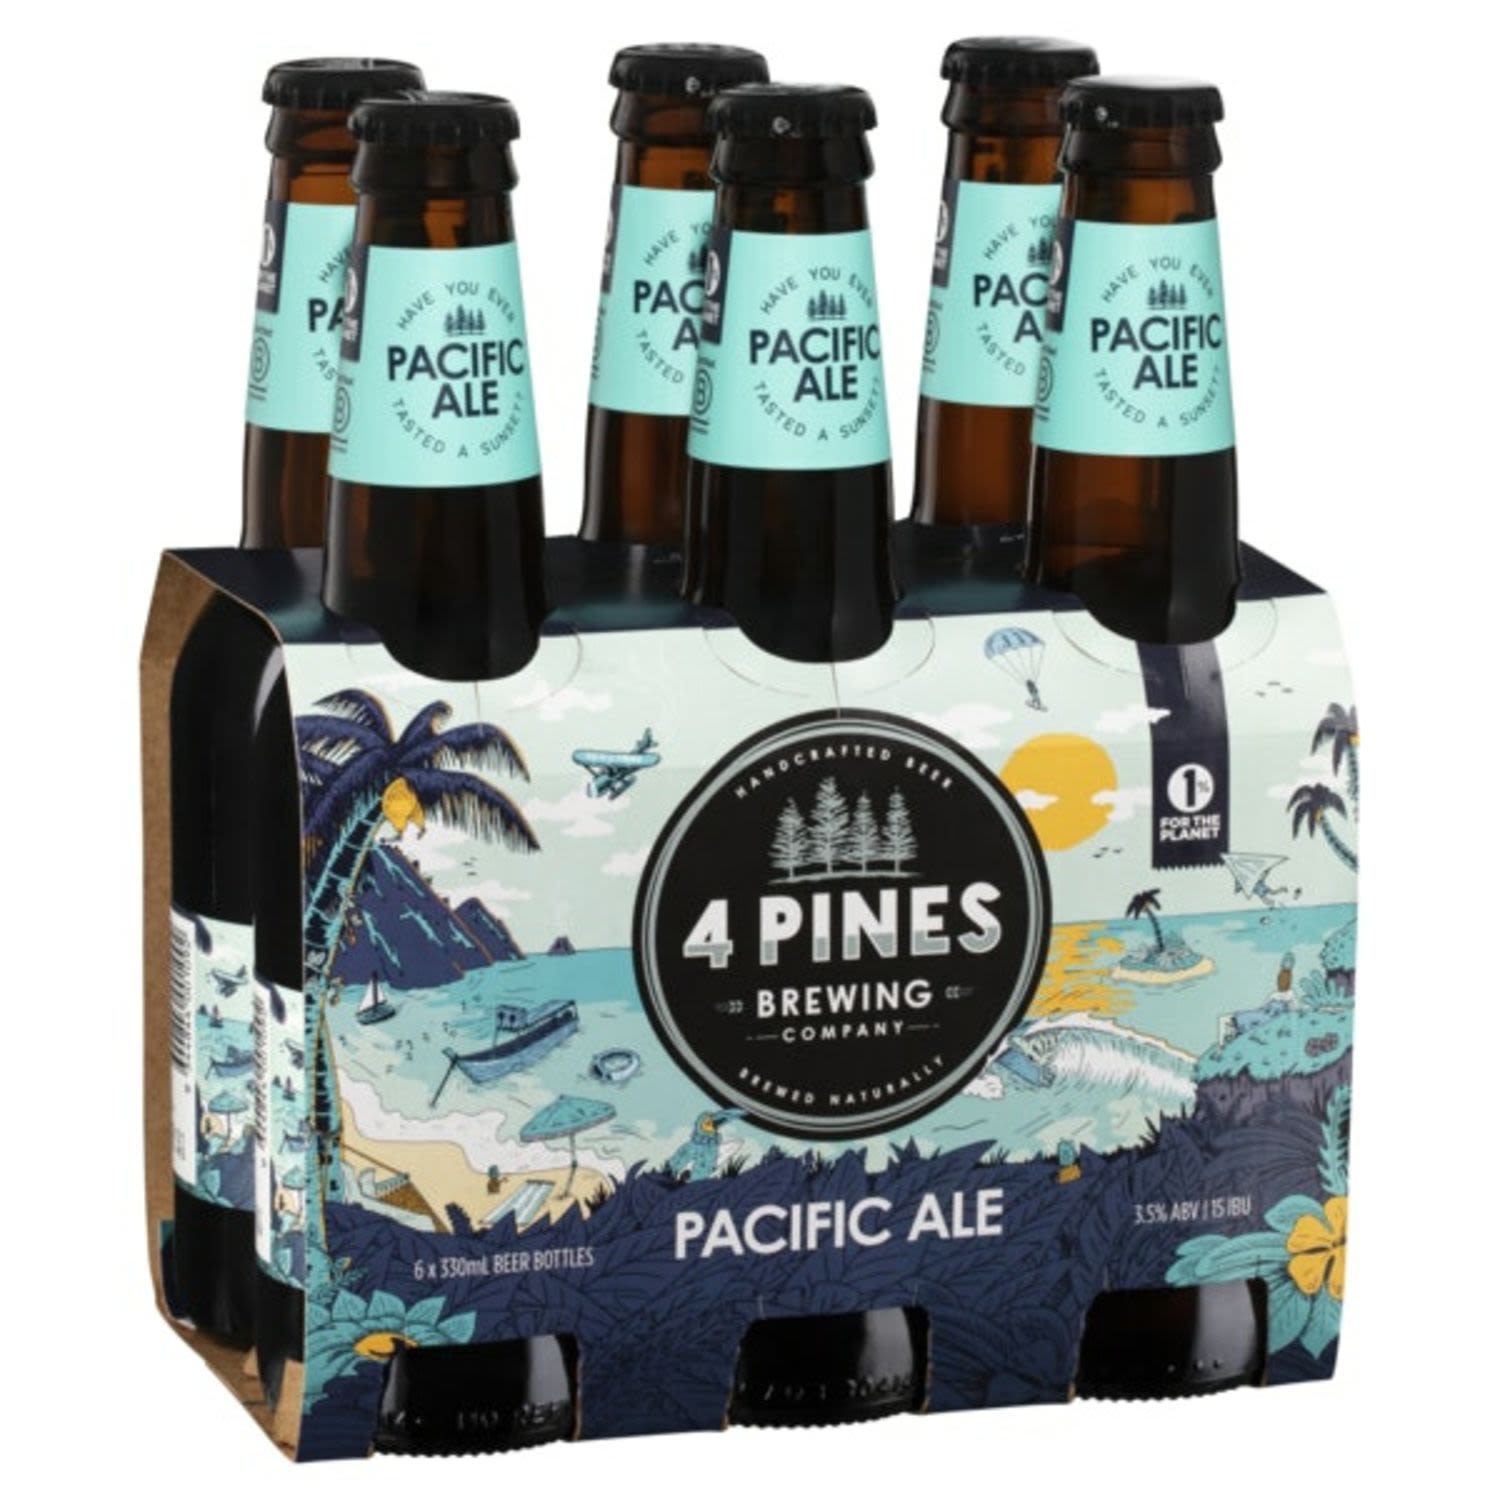 4 Pines Pacific Ale 3.5% Bottle 330mL 6 Pack